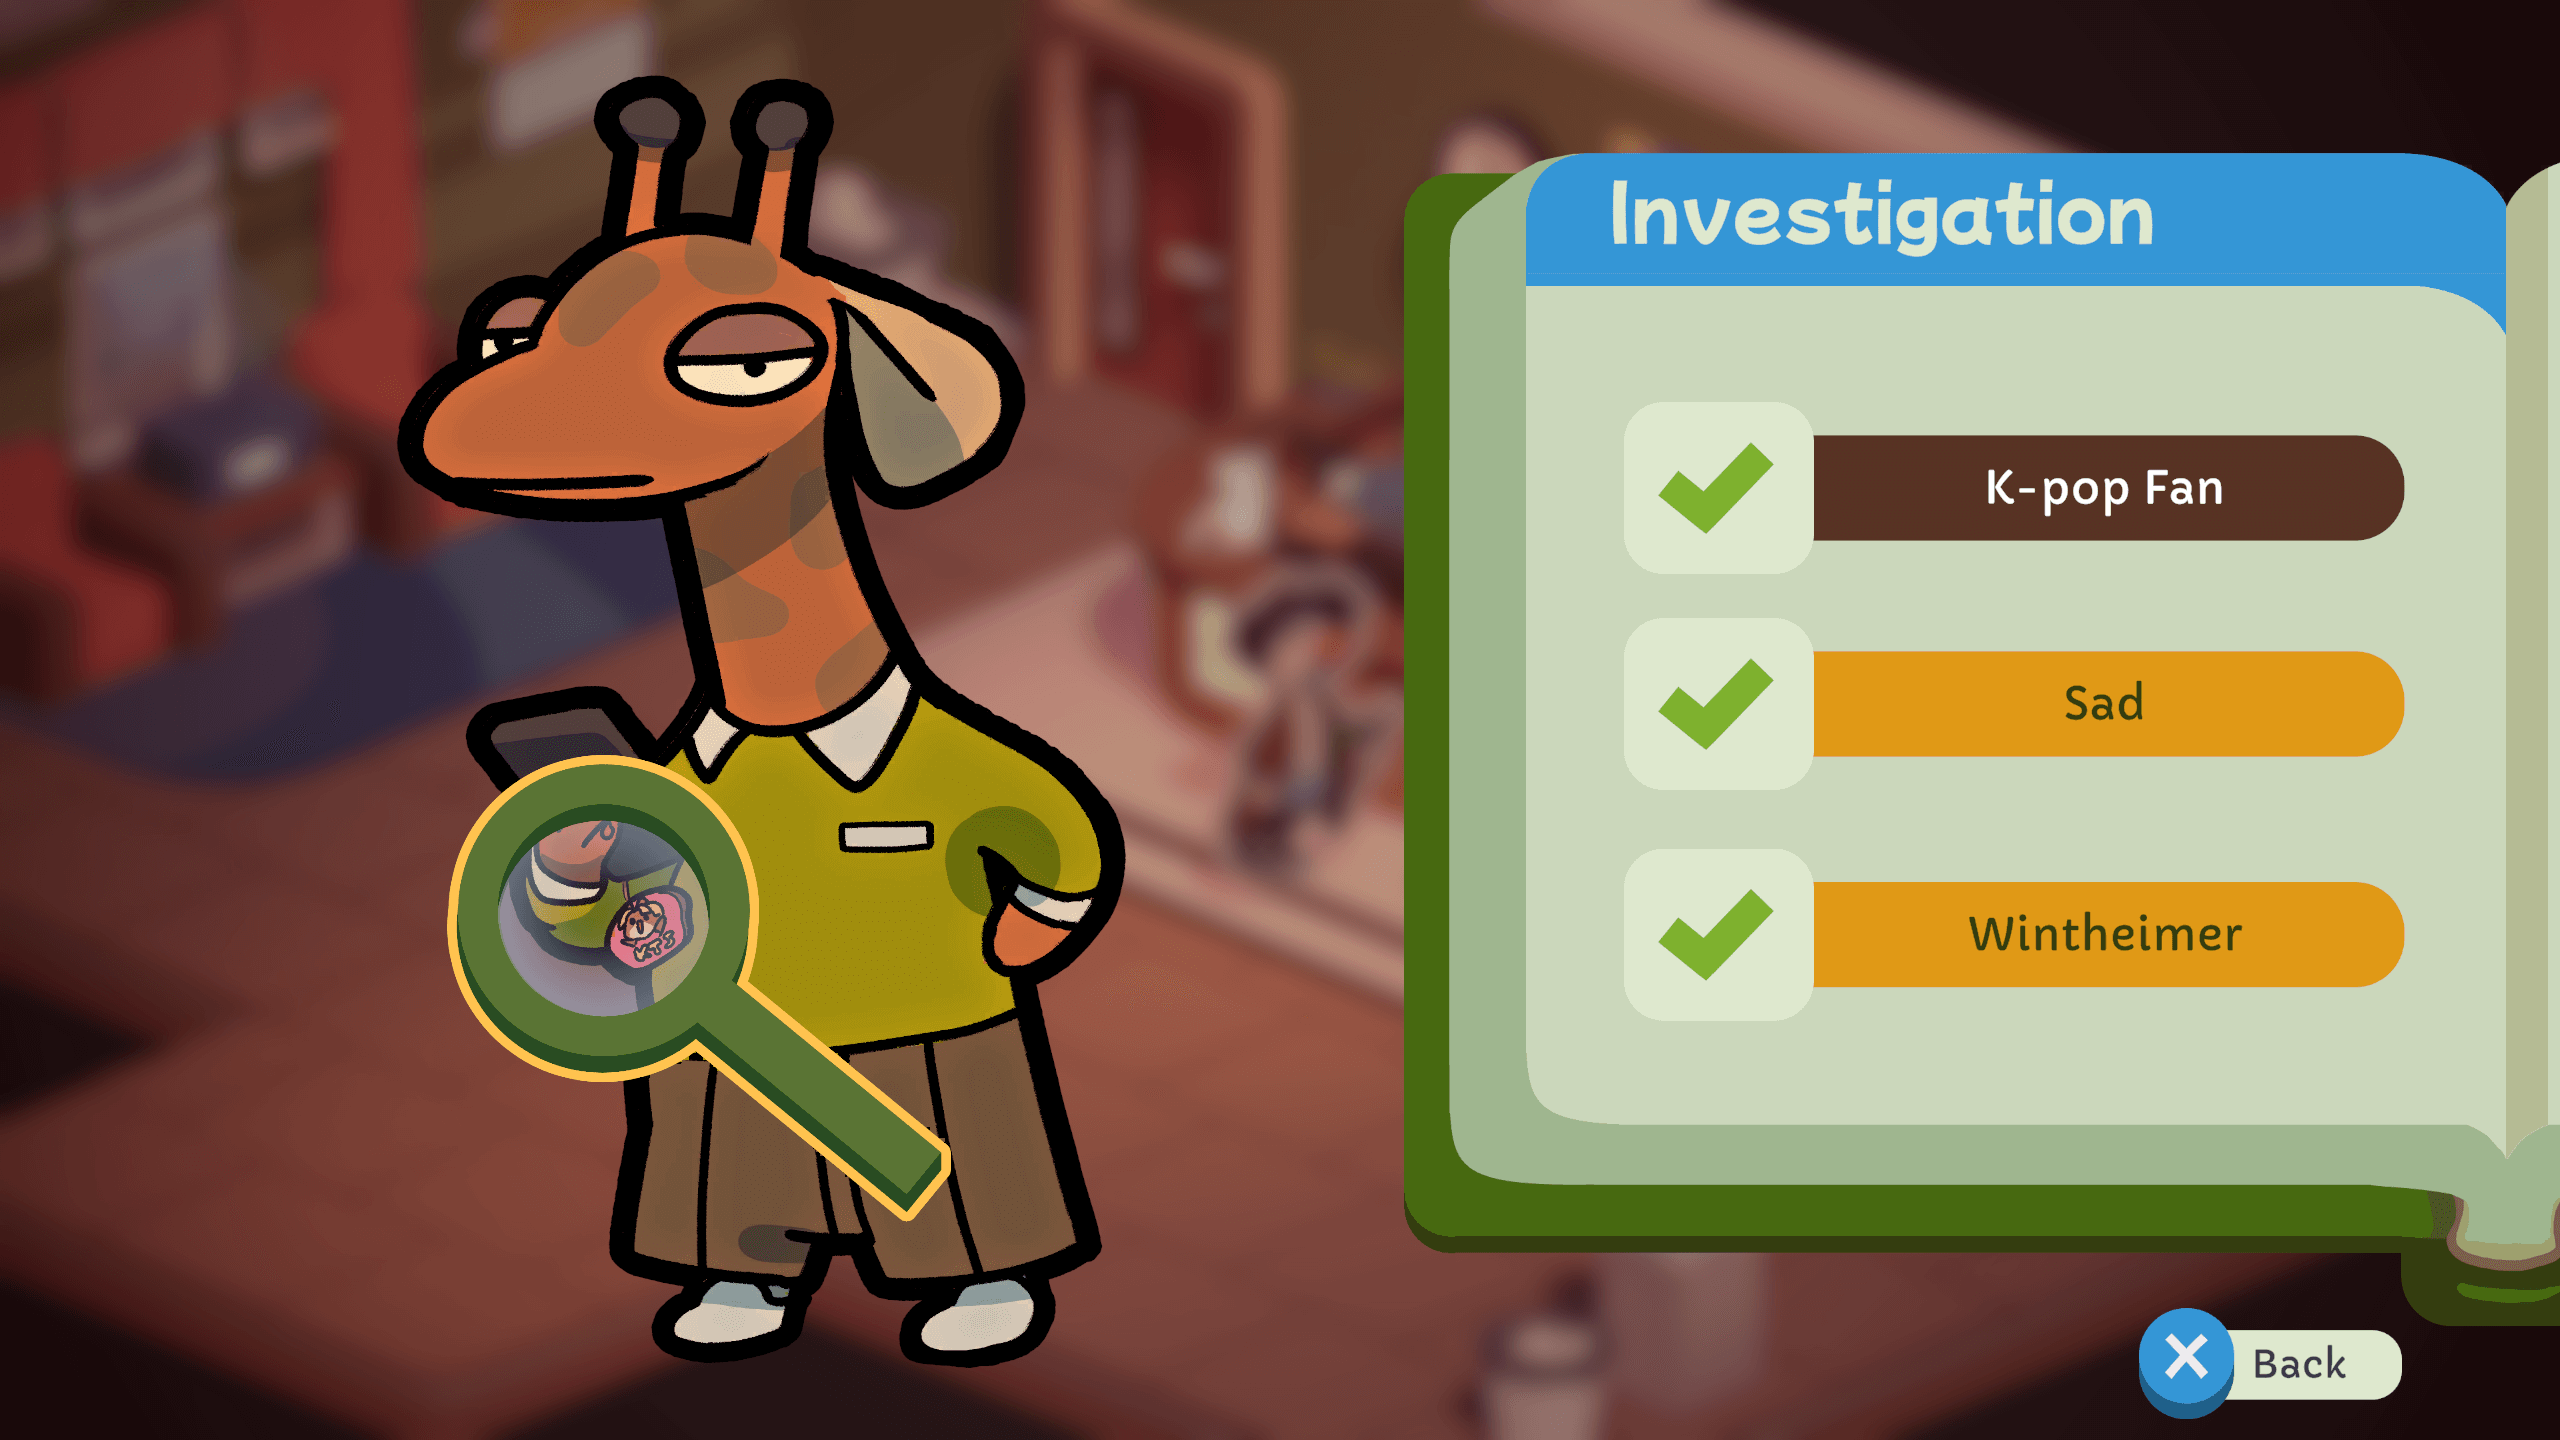 A screenshot from the game Duck Detective: The Secret Salami. It shows the UI of when the player is inspecting a suspect. You can see a tan giraffe in a green seat with beige slacks. There is a green magnifying glass that assisst players in finding clues to the investigation. It also shows a notebook on the right that has key words such as K-pop fan, sad, and Wintheimer